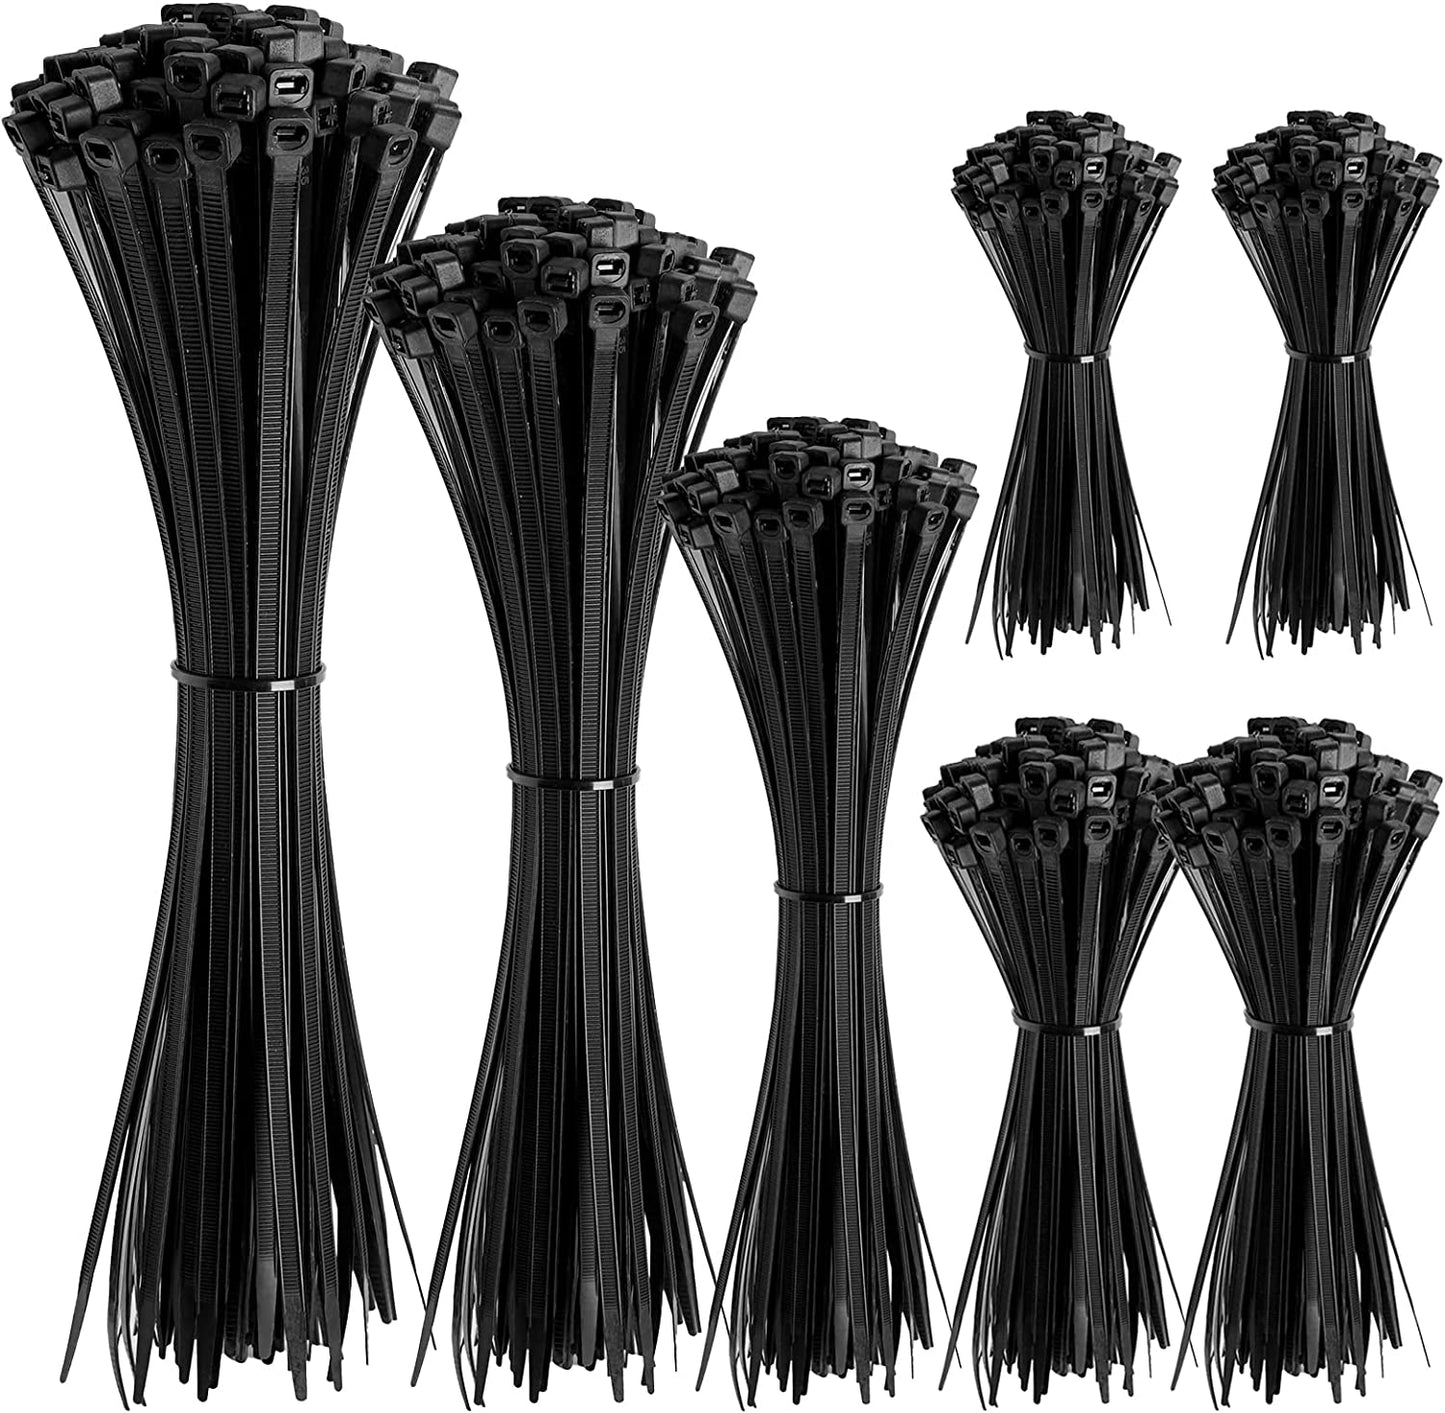 Cable Zip Ties, 400/600 Pack Black Zip Ties Assorted Sizes 12+8+6+4 Inch, Multi-Purpose Self-Locking Nylon Cable Ties Cord Management Ties,Plastic Wire Ties for Home, Office, Garden, Workshop